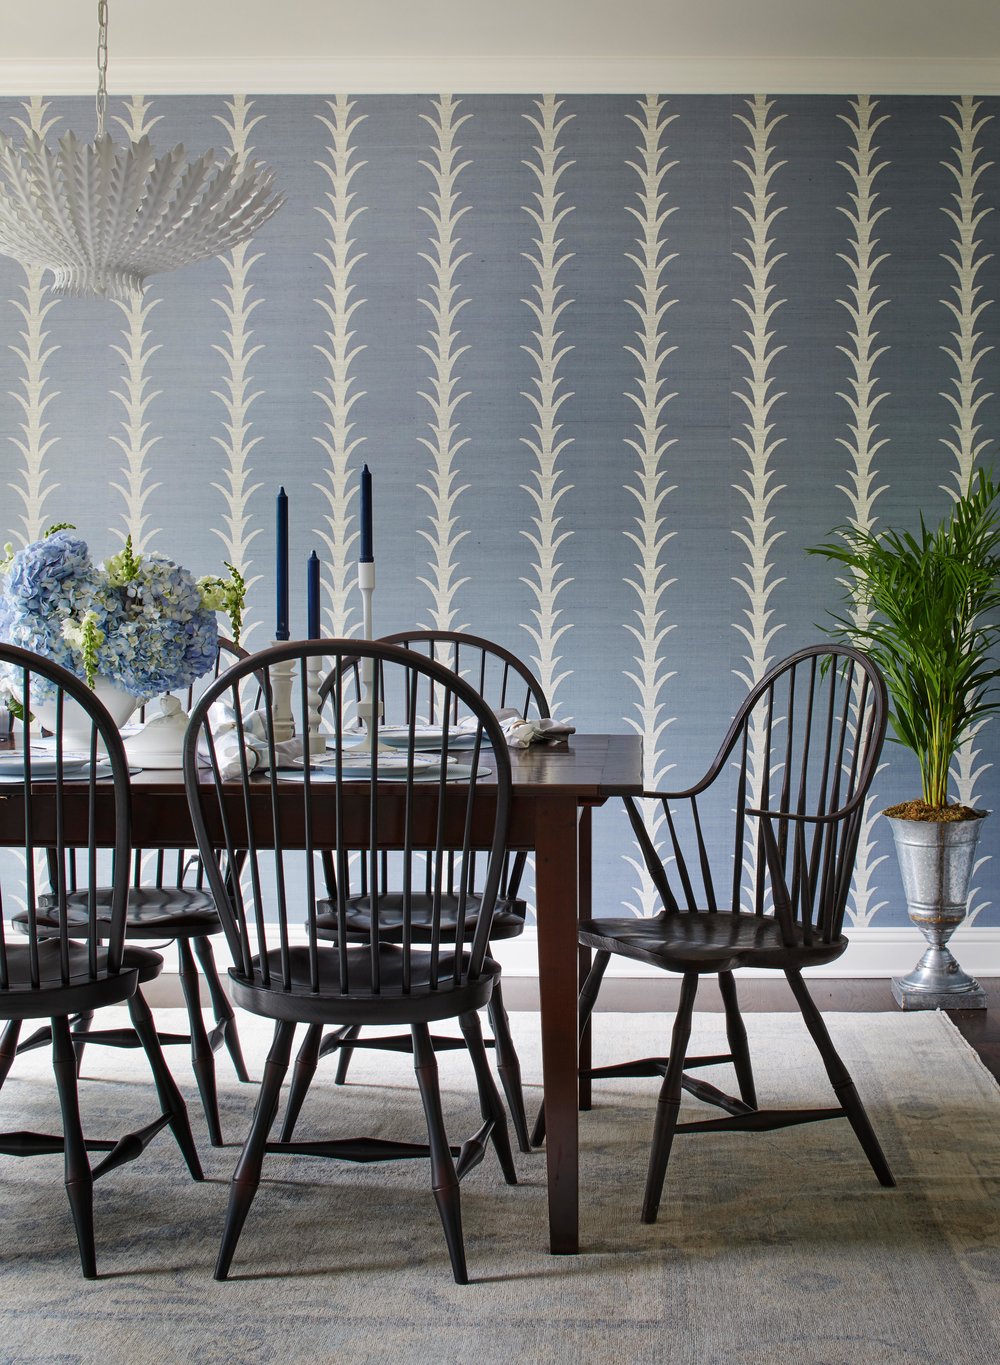 Acanthus motif and blue wallpaper in a classic dining room. Come see more interior design inspiration from Elizabeth Drake. Photo by Werner Straube. #interiordesign #classicdesign #traditionaldecor #housetour #elizabethdrake